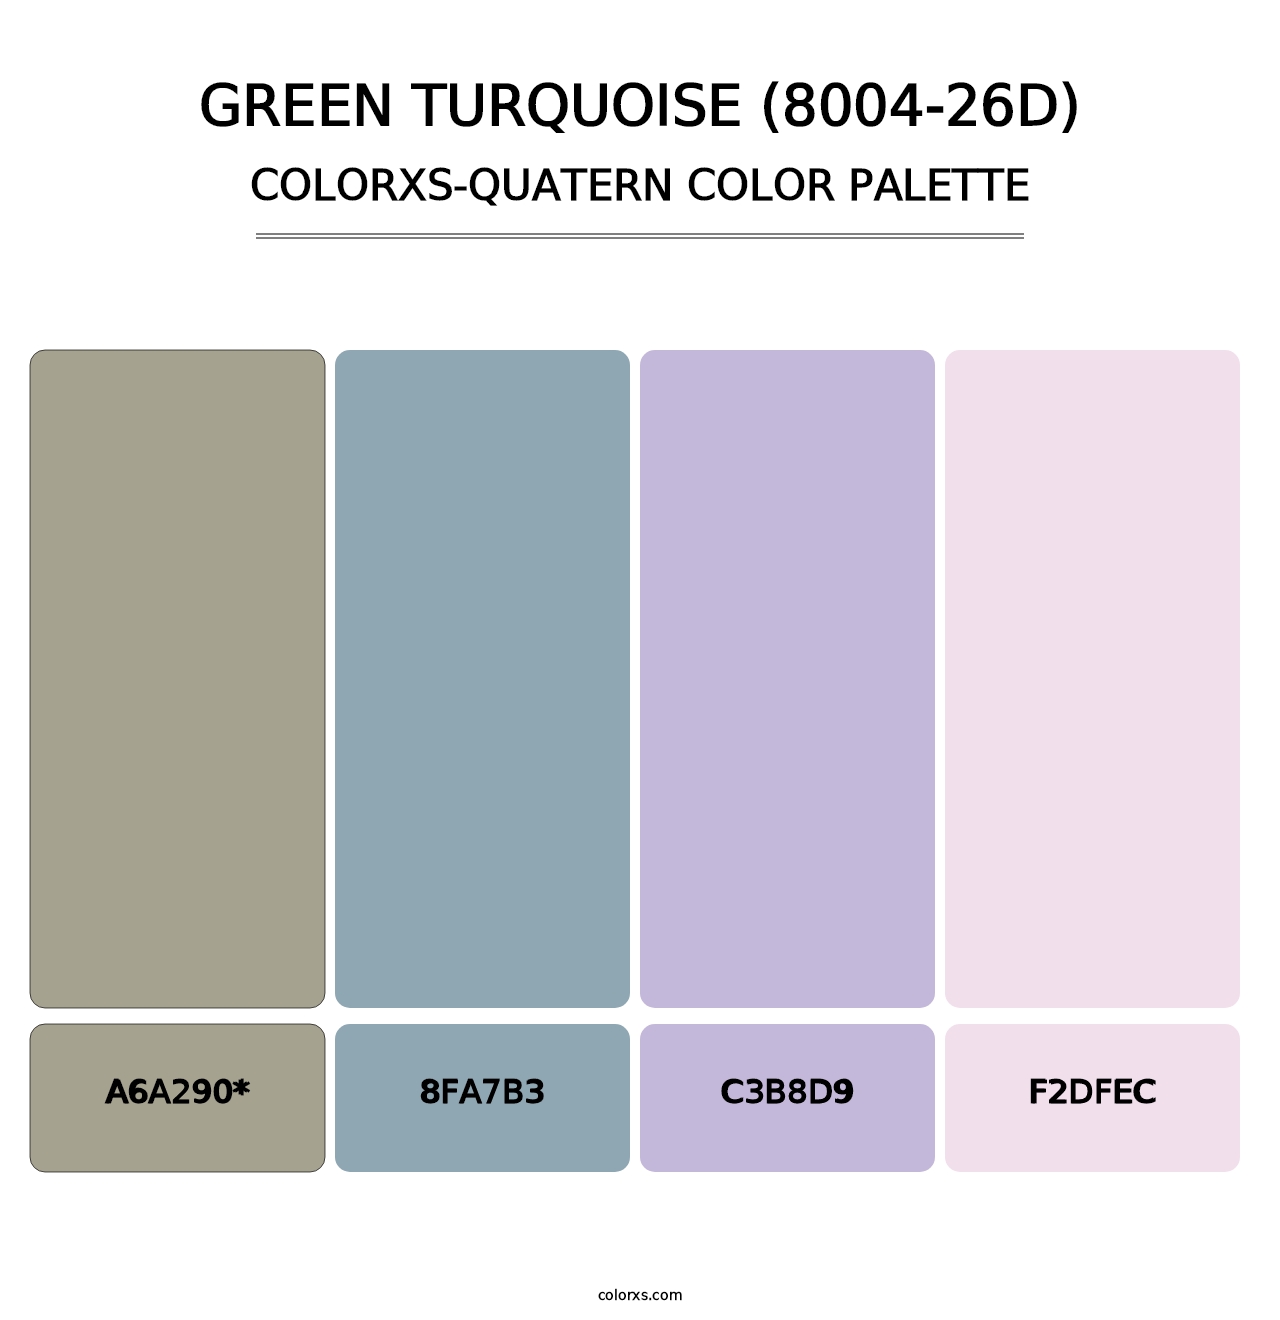 Green Turquoise (8004-26D) - Colorxs Quatern Palette